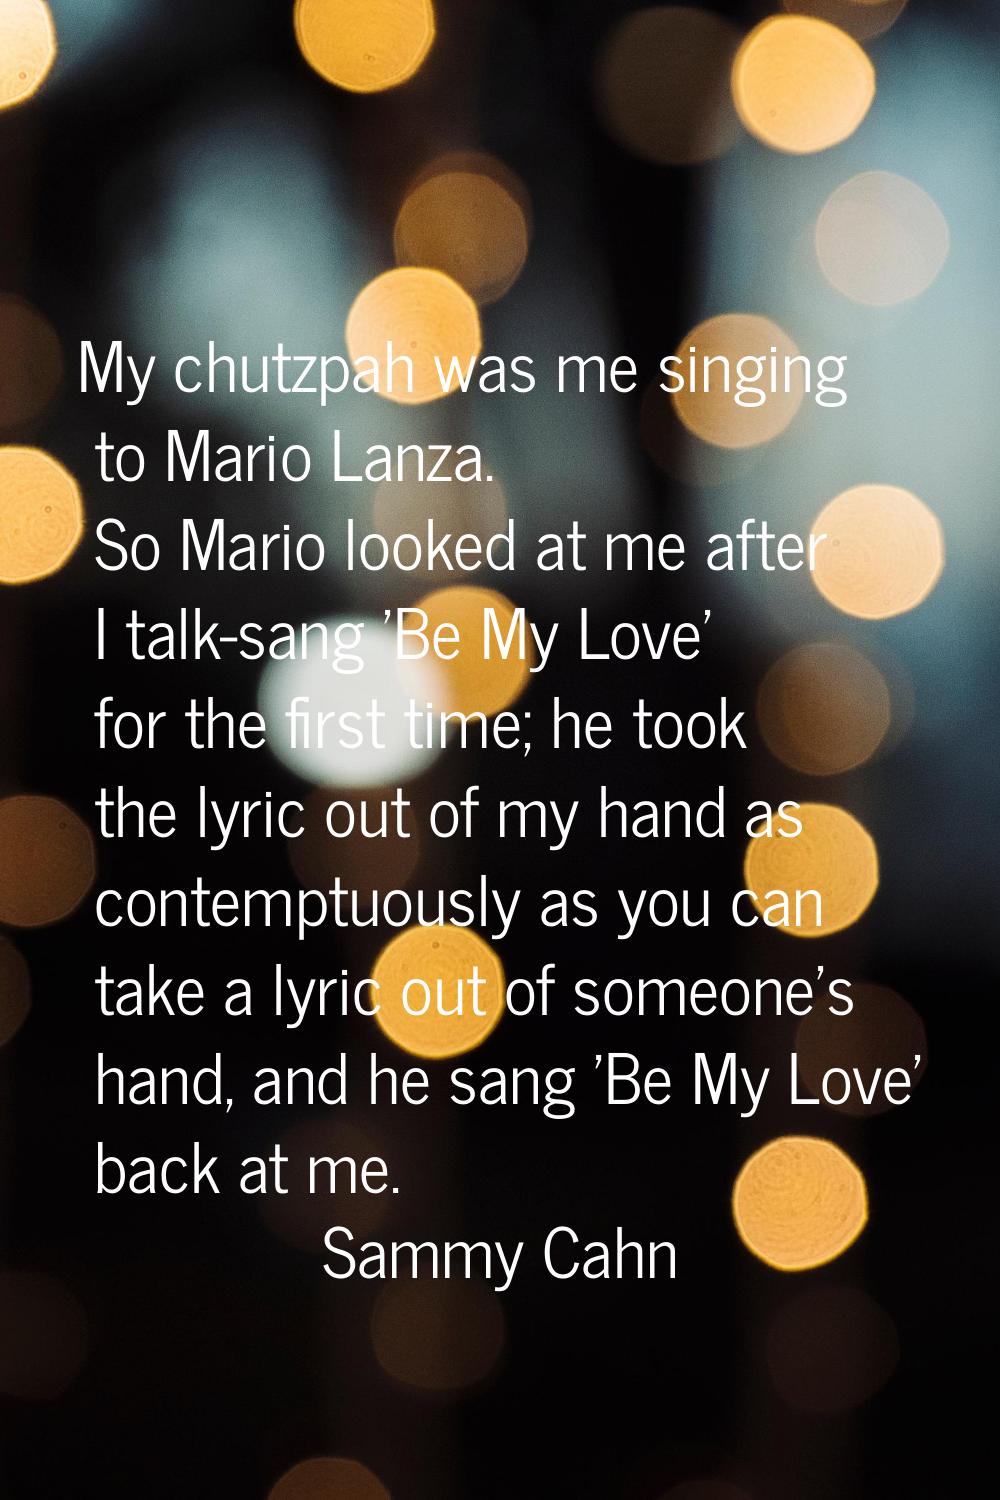 My chutzpah was me singing to Mario Lanza. So Mario looked at me after I talk-sang 'Be My Love' for